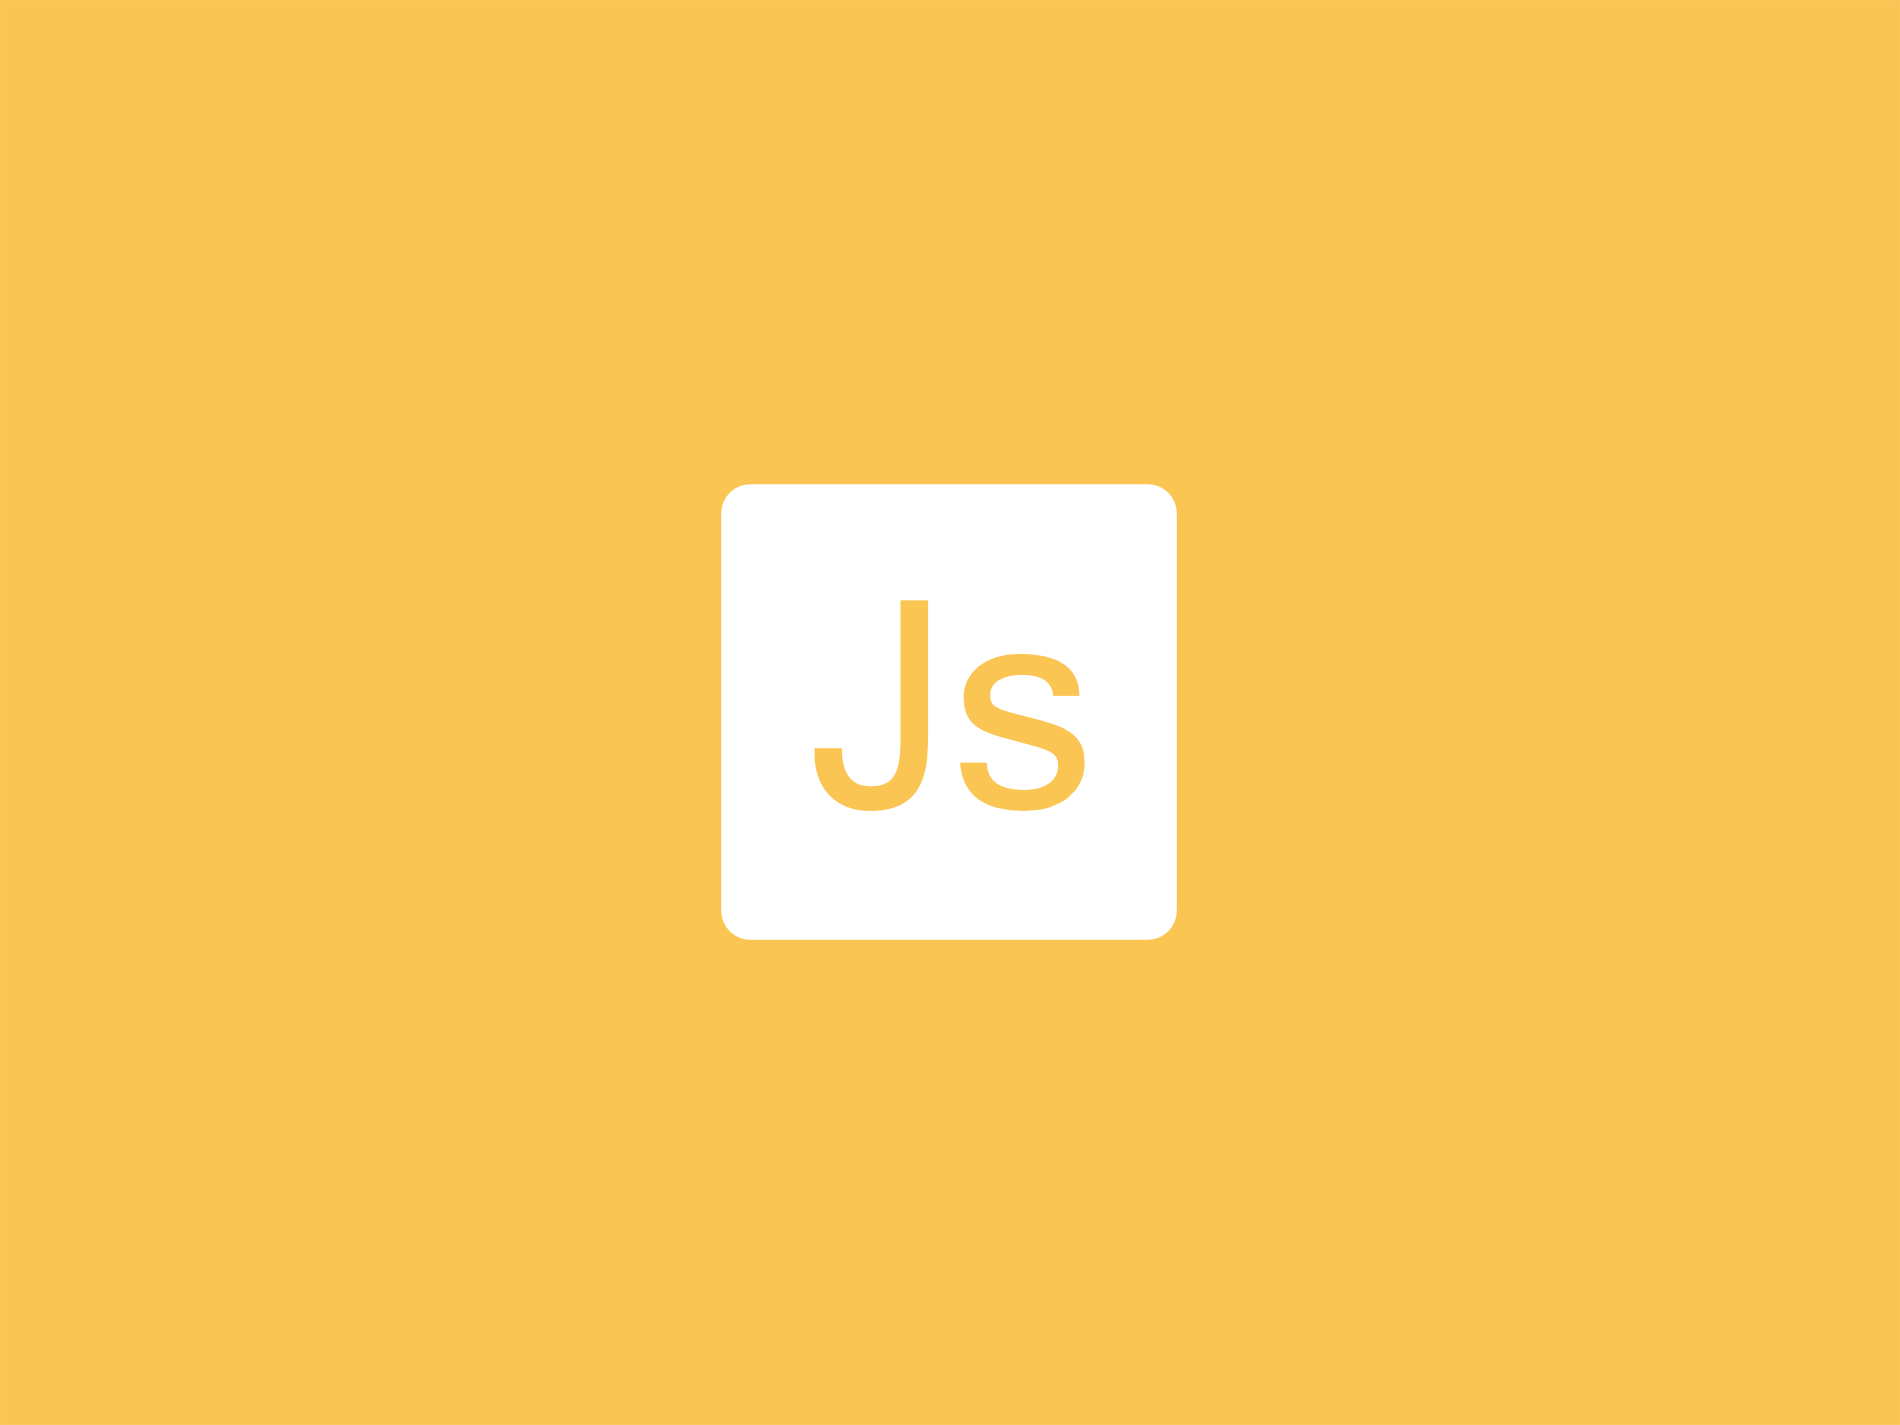 JavaScript: the this keyword with arrow functions and event handlers